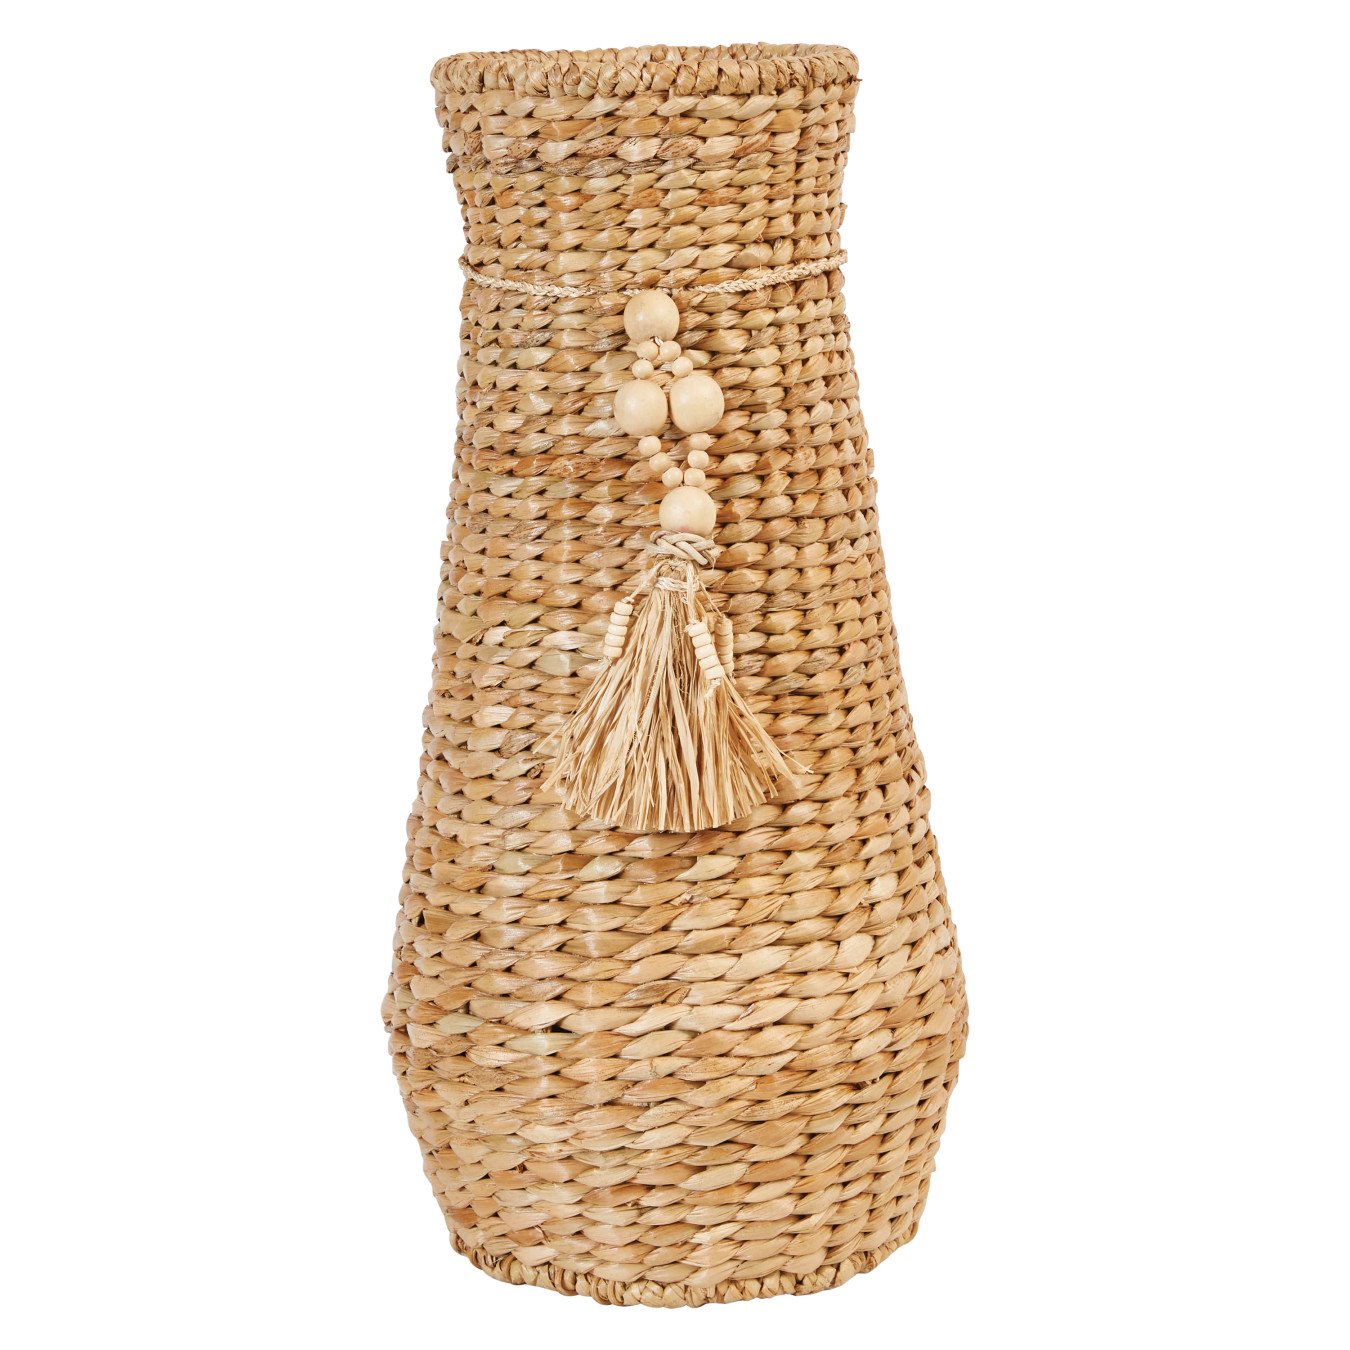 Decorative 21"H Water Hyacinth Vase with Beaded Tassels